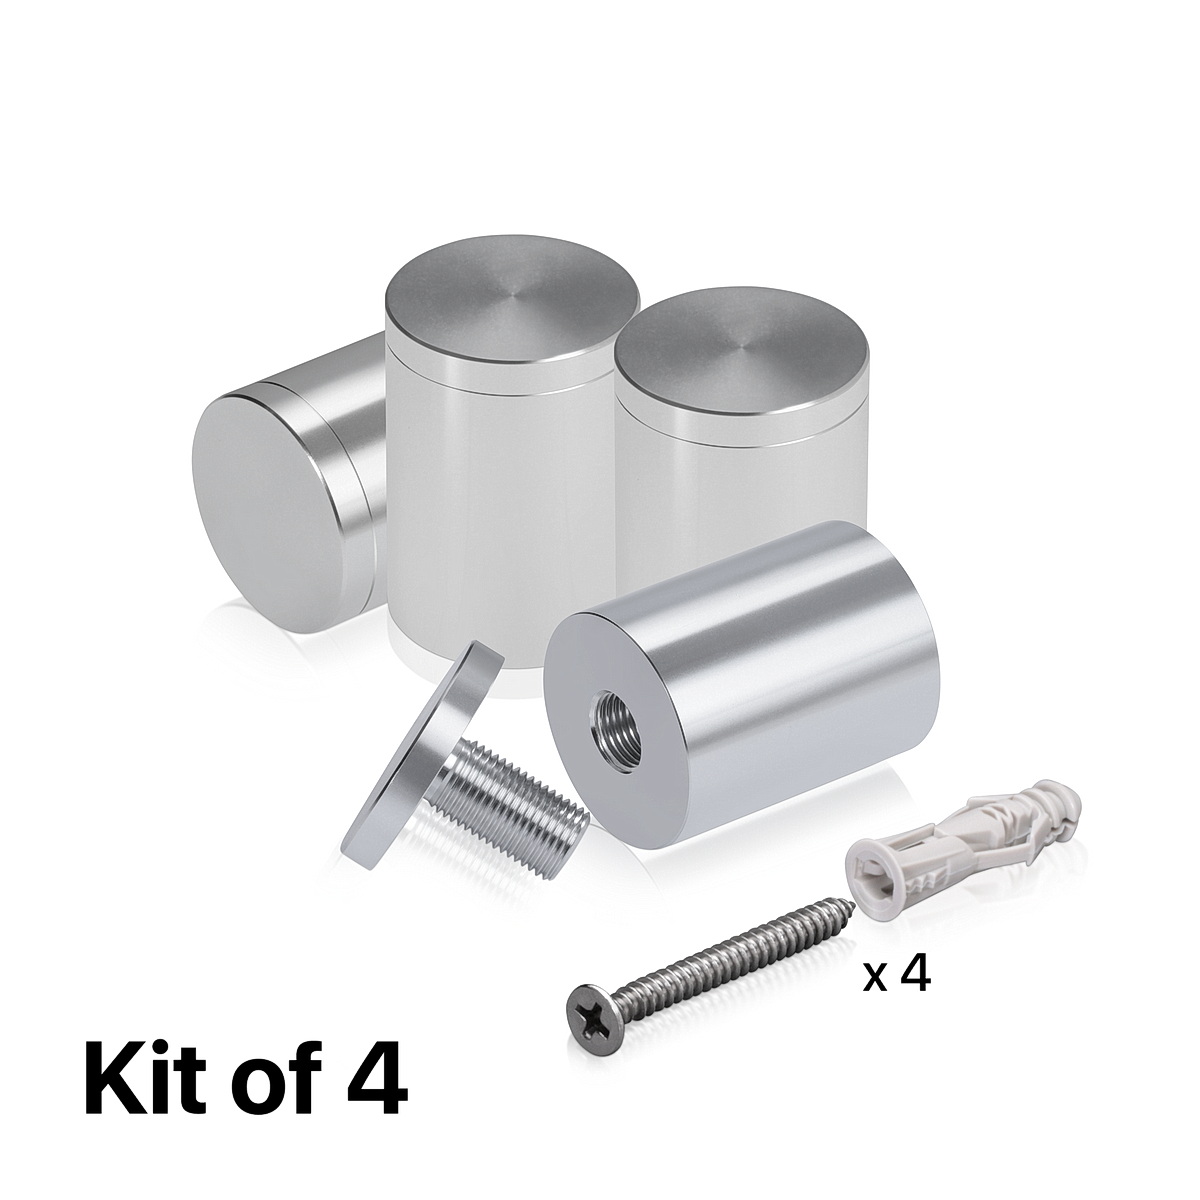 (Set of 4) 1-1/4'' Diameter X 1-1/2'' Barrel Length, Affordable Aluminum Standoffs, Silver Anodized Finish Standoff and (4) 2216Z Screws and (4) LANC1 Anchors for concrete/drywall (For Inside/Outside) [Required Material Hole Size: 7/16'']